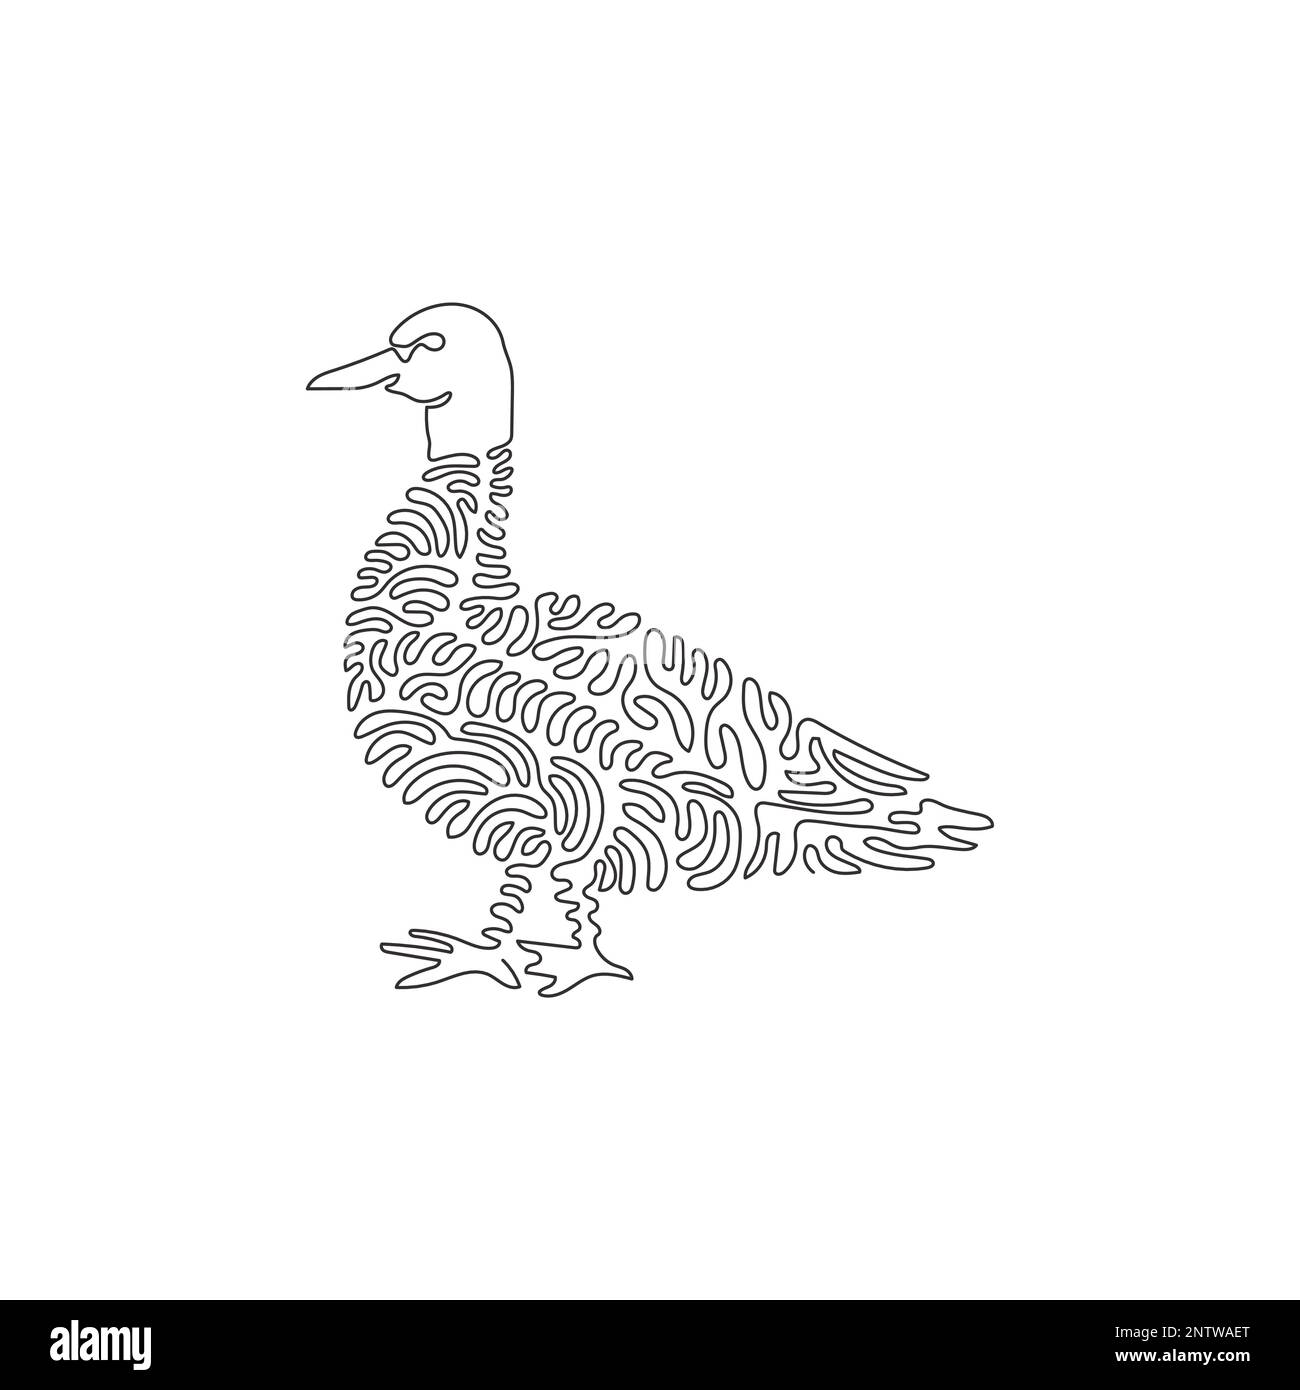 Single one curly line drawing of cute mallard abstract art. Continuous line drawing design vector illustration of common mallard duck in the world Stock Vector